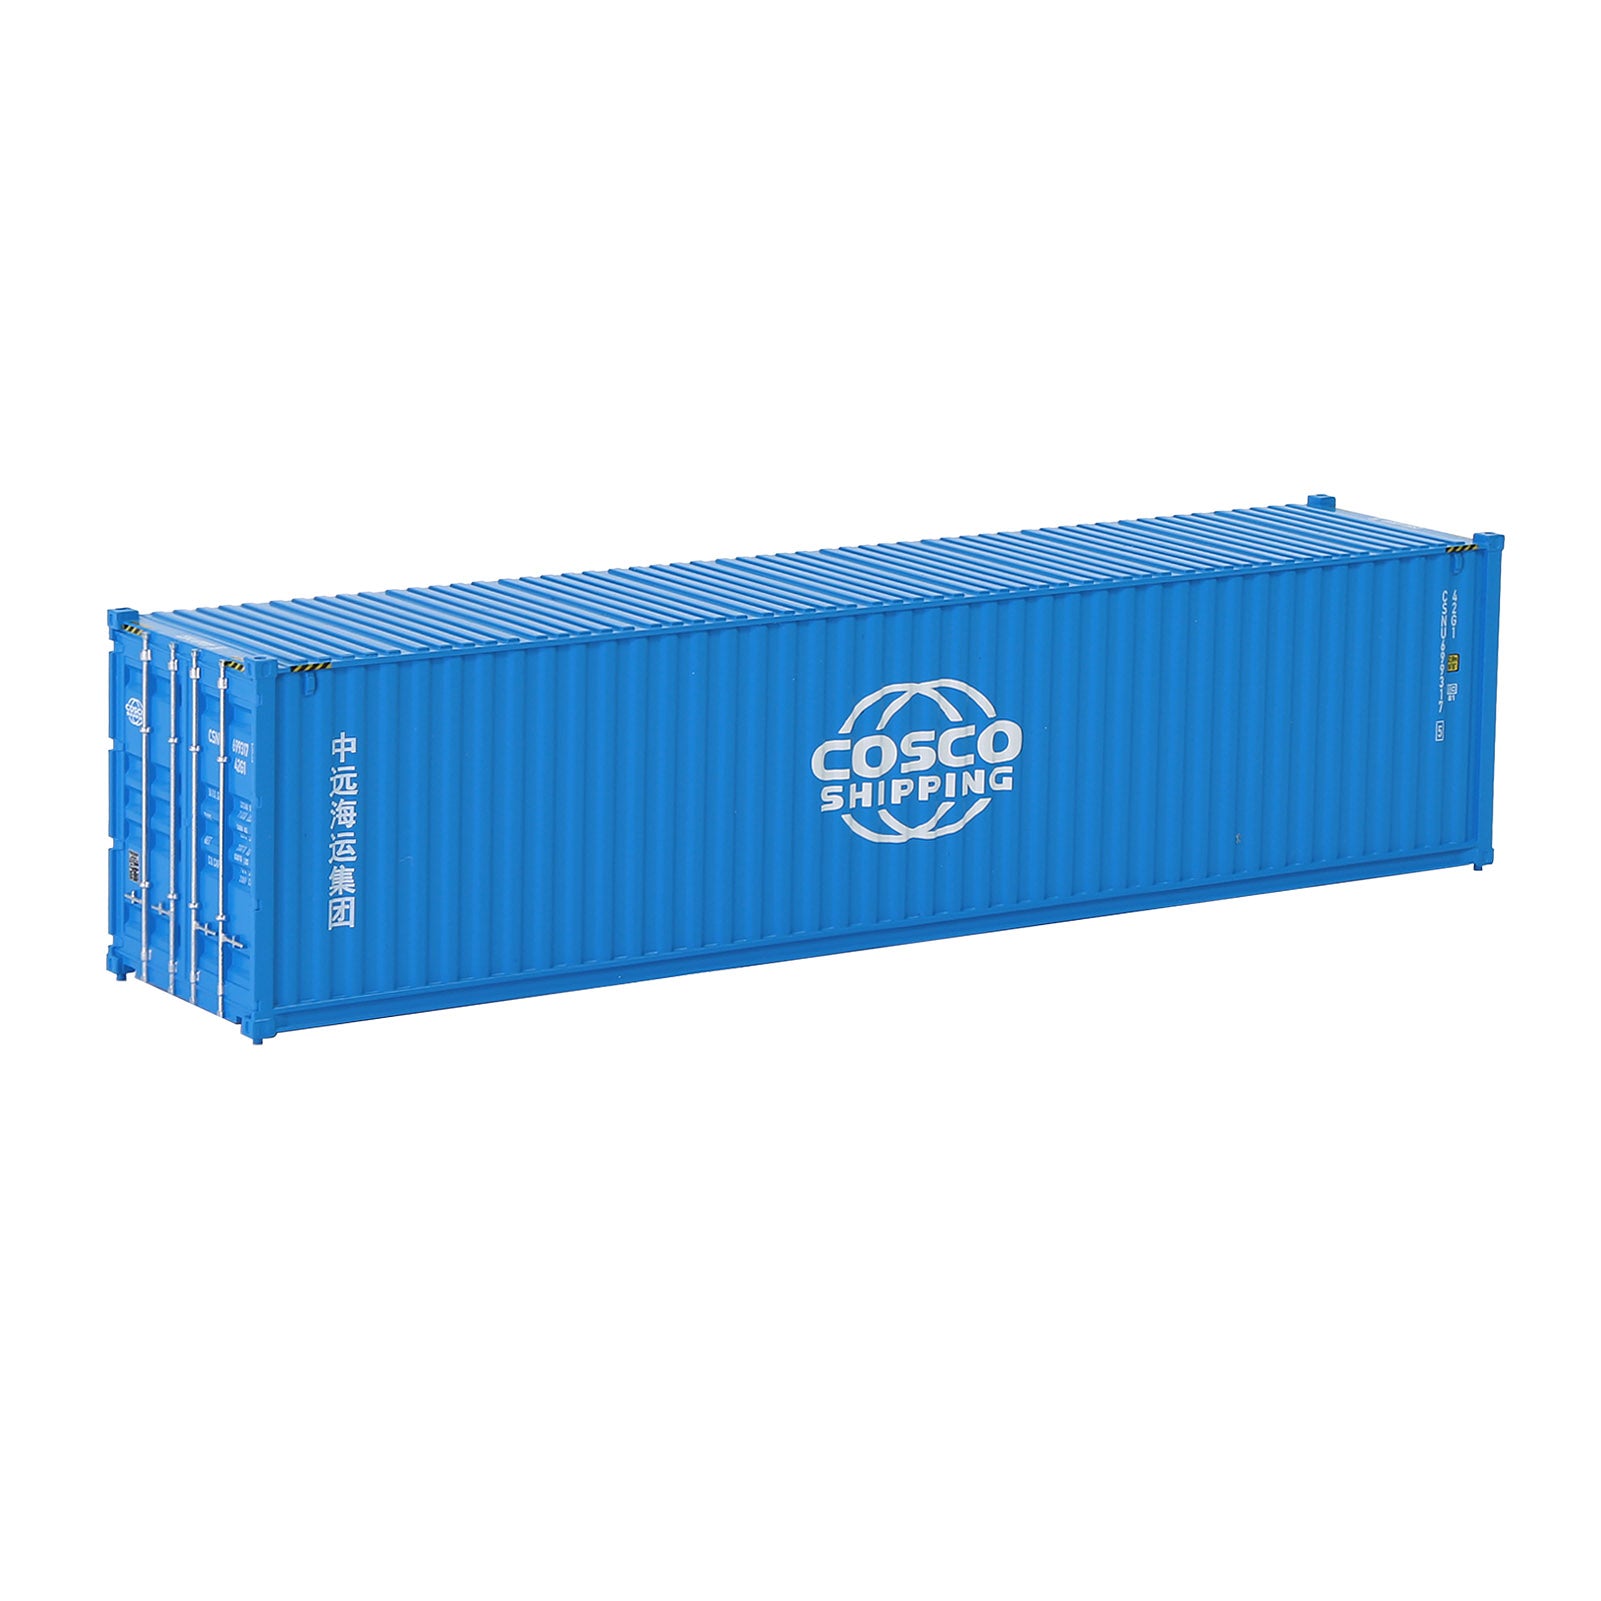 C8746 1pc HO Scale 1:87 40ft Model Container